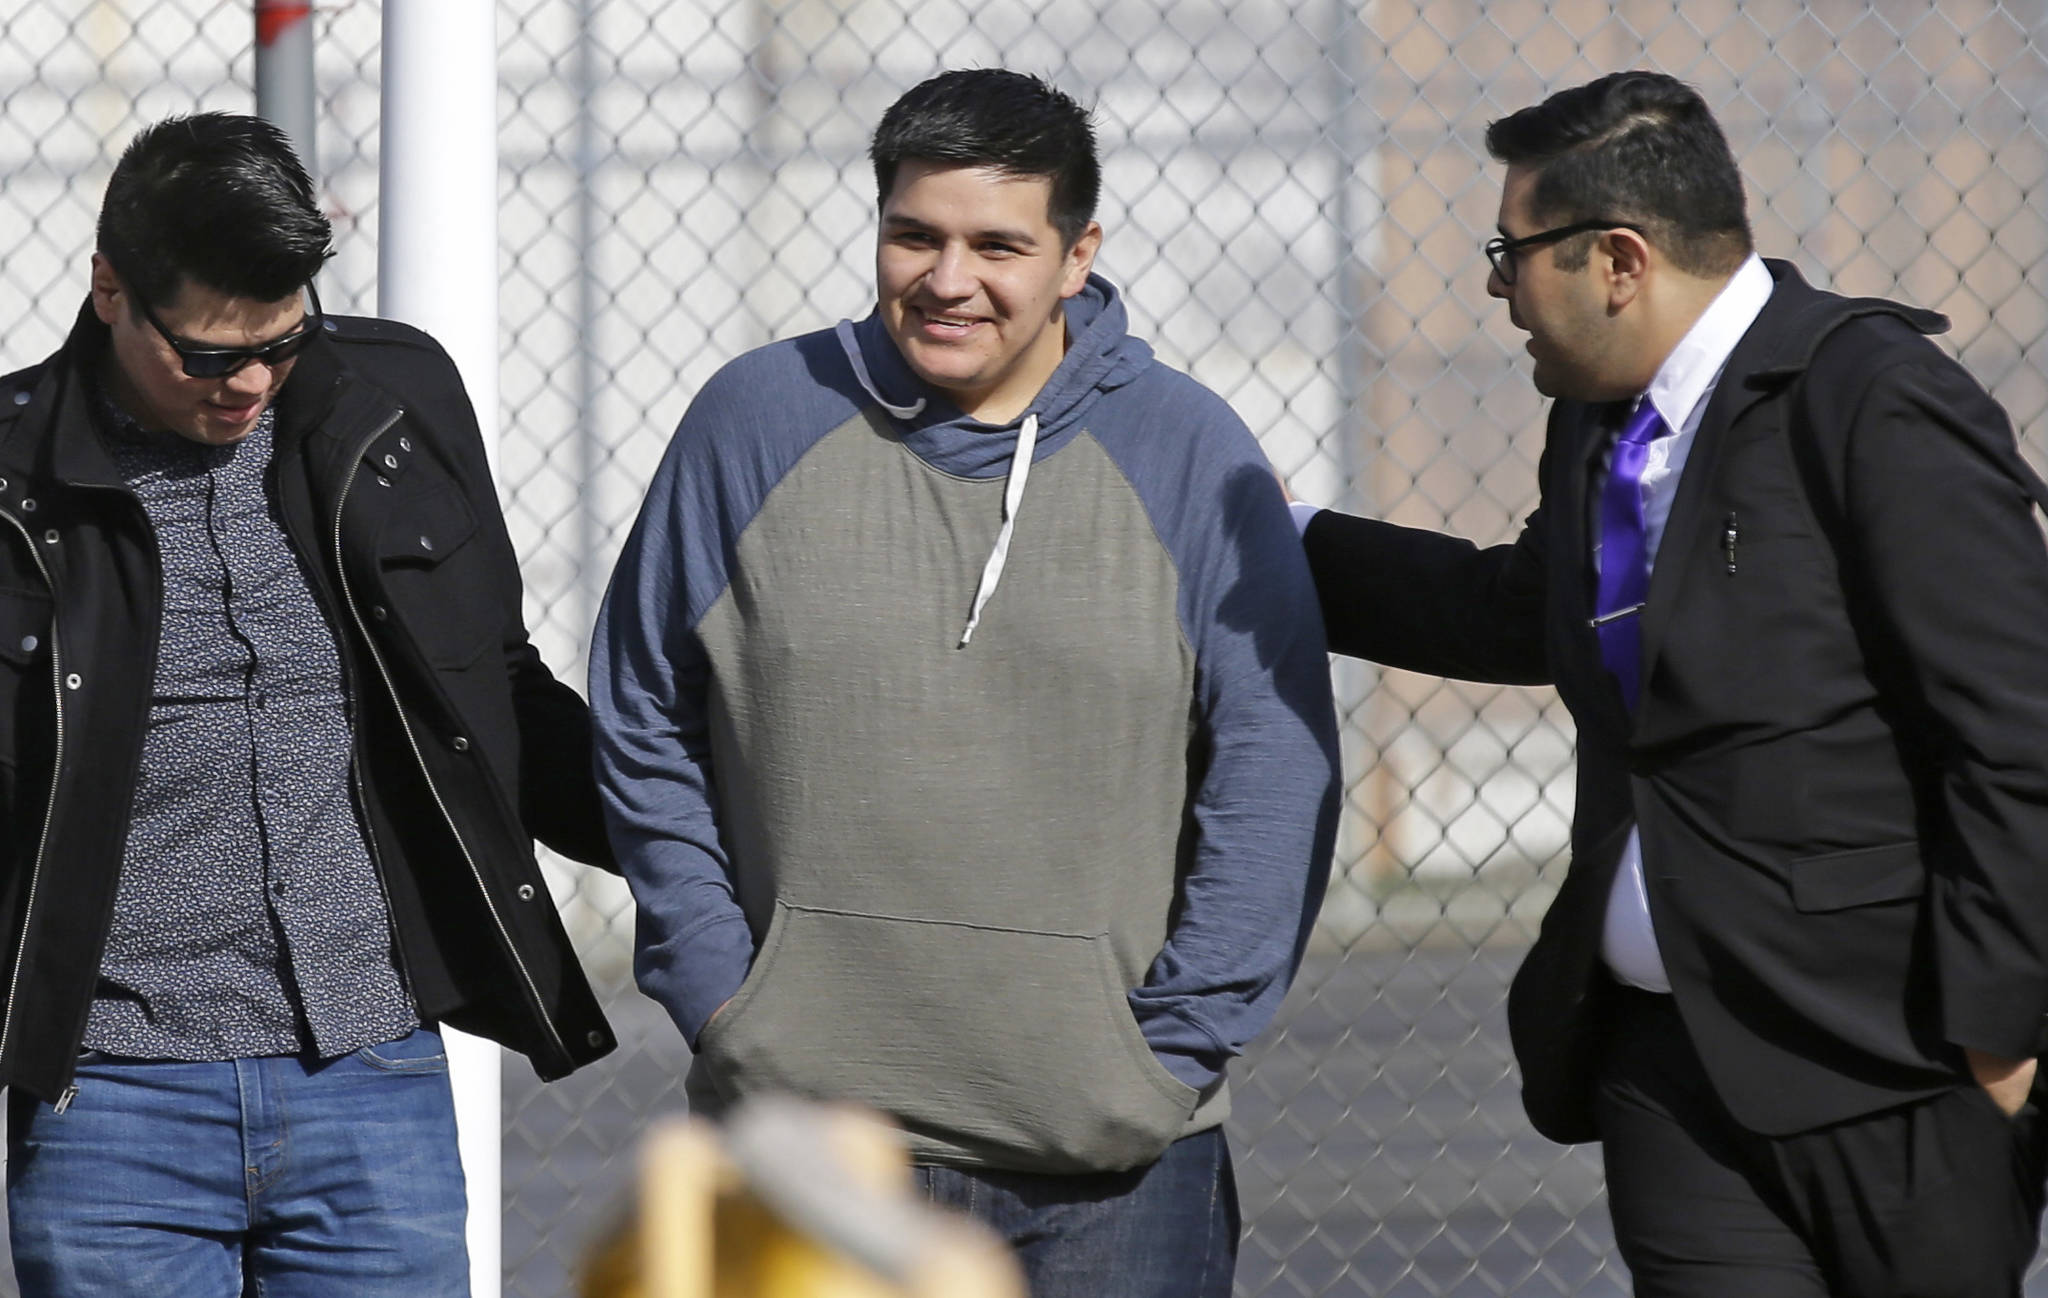 Daniel Ramirez Medina, center, walks out of the Northwest Detention Center in Tacoma with his attorney, Luis Cortes, right, and his brother, who has not been identified by name, after Ramirez was released from federal custody Wednesday. (Ted S. Warren/The Associated Press)